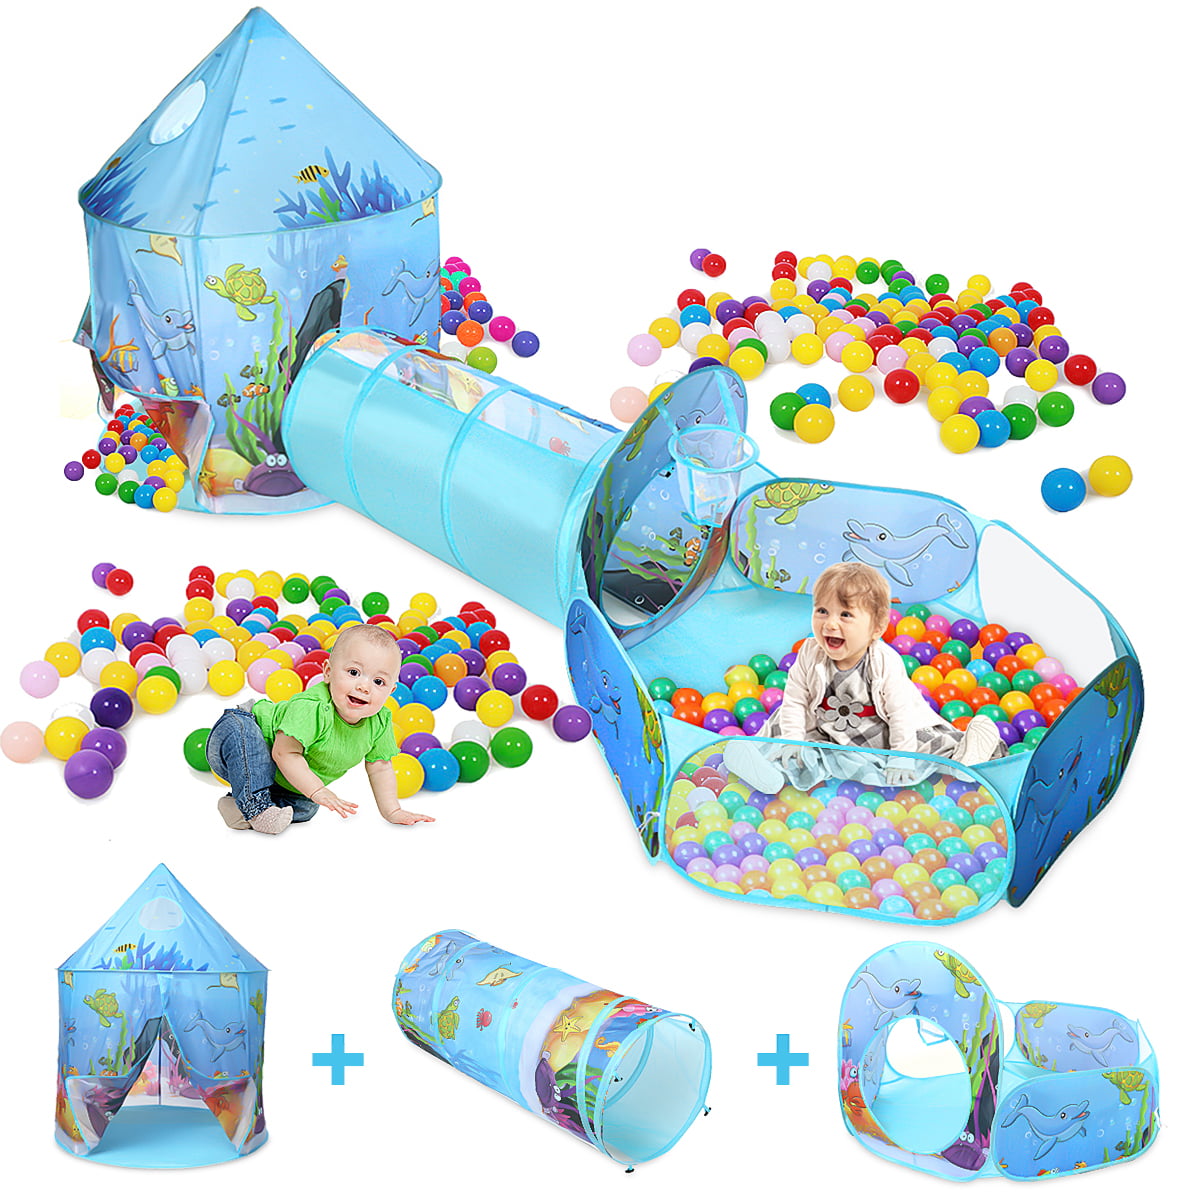 Portable 3 in 1 Kid Play Tent with Crawl Tunnel and Ball Pit Tent Playhouse Tent 